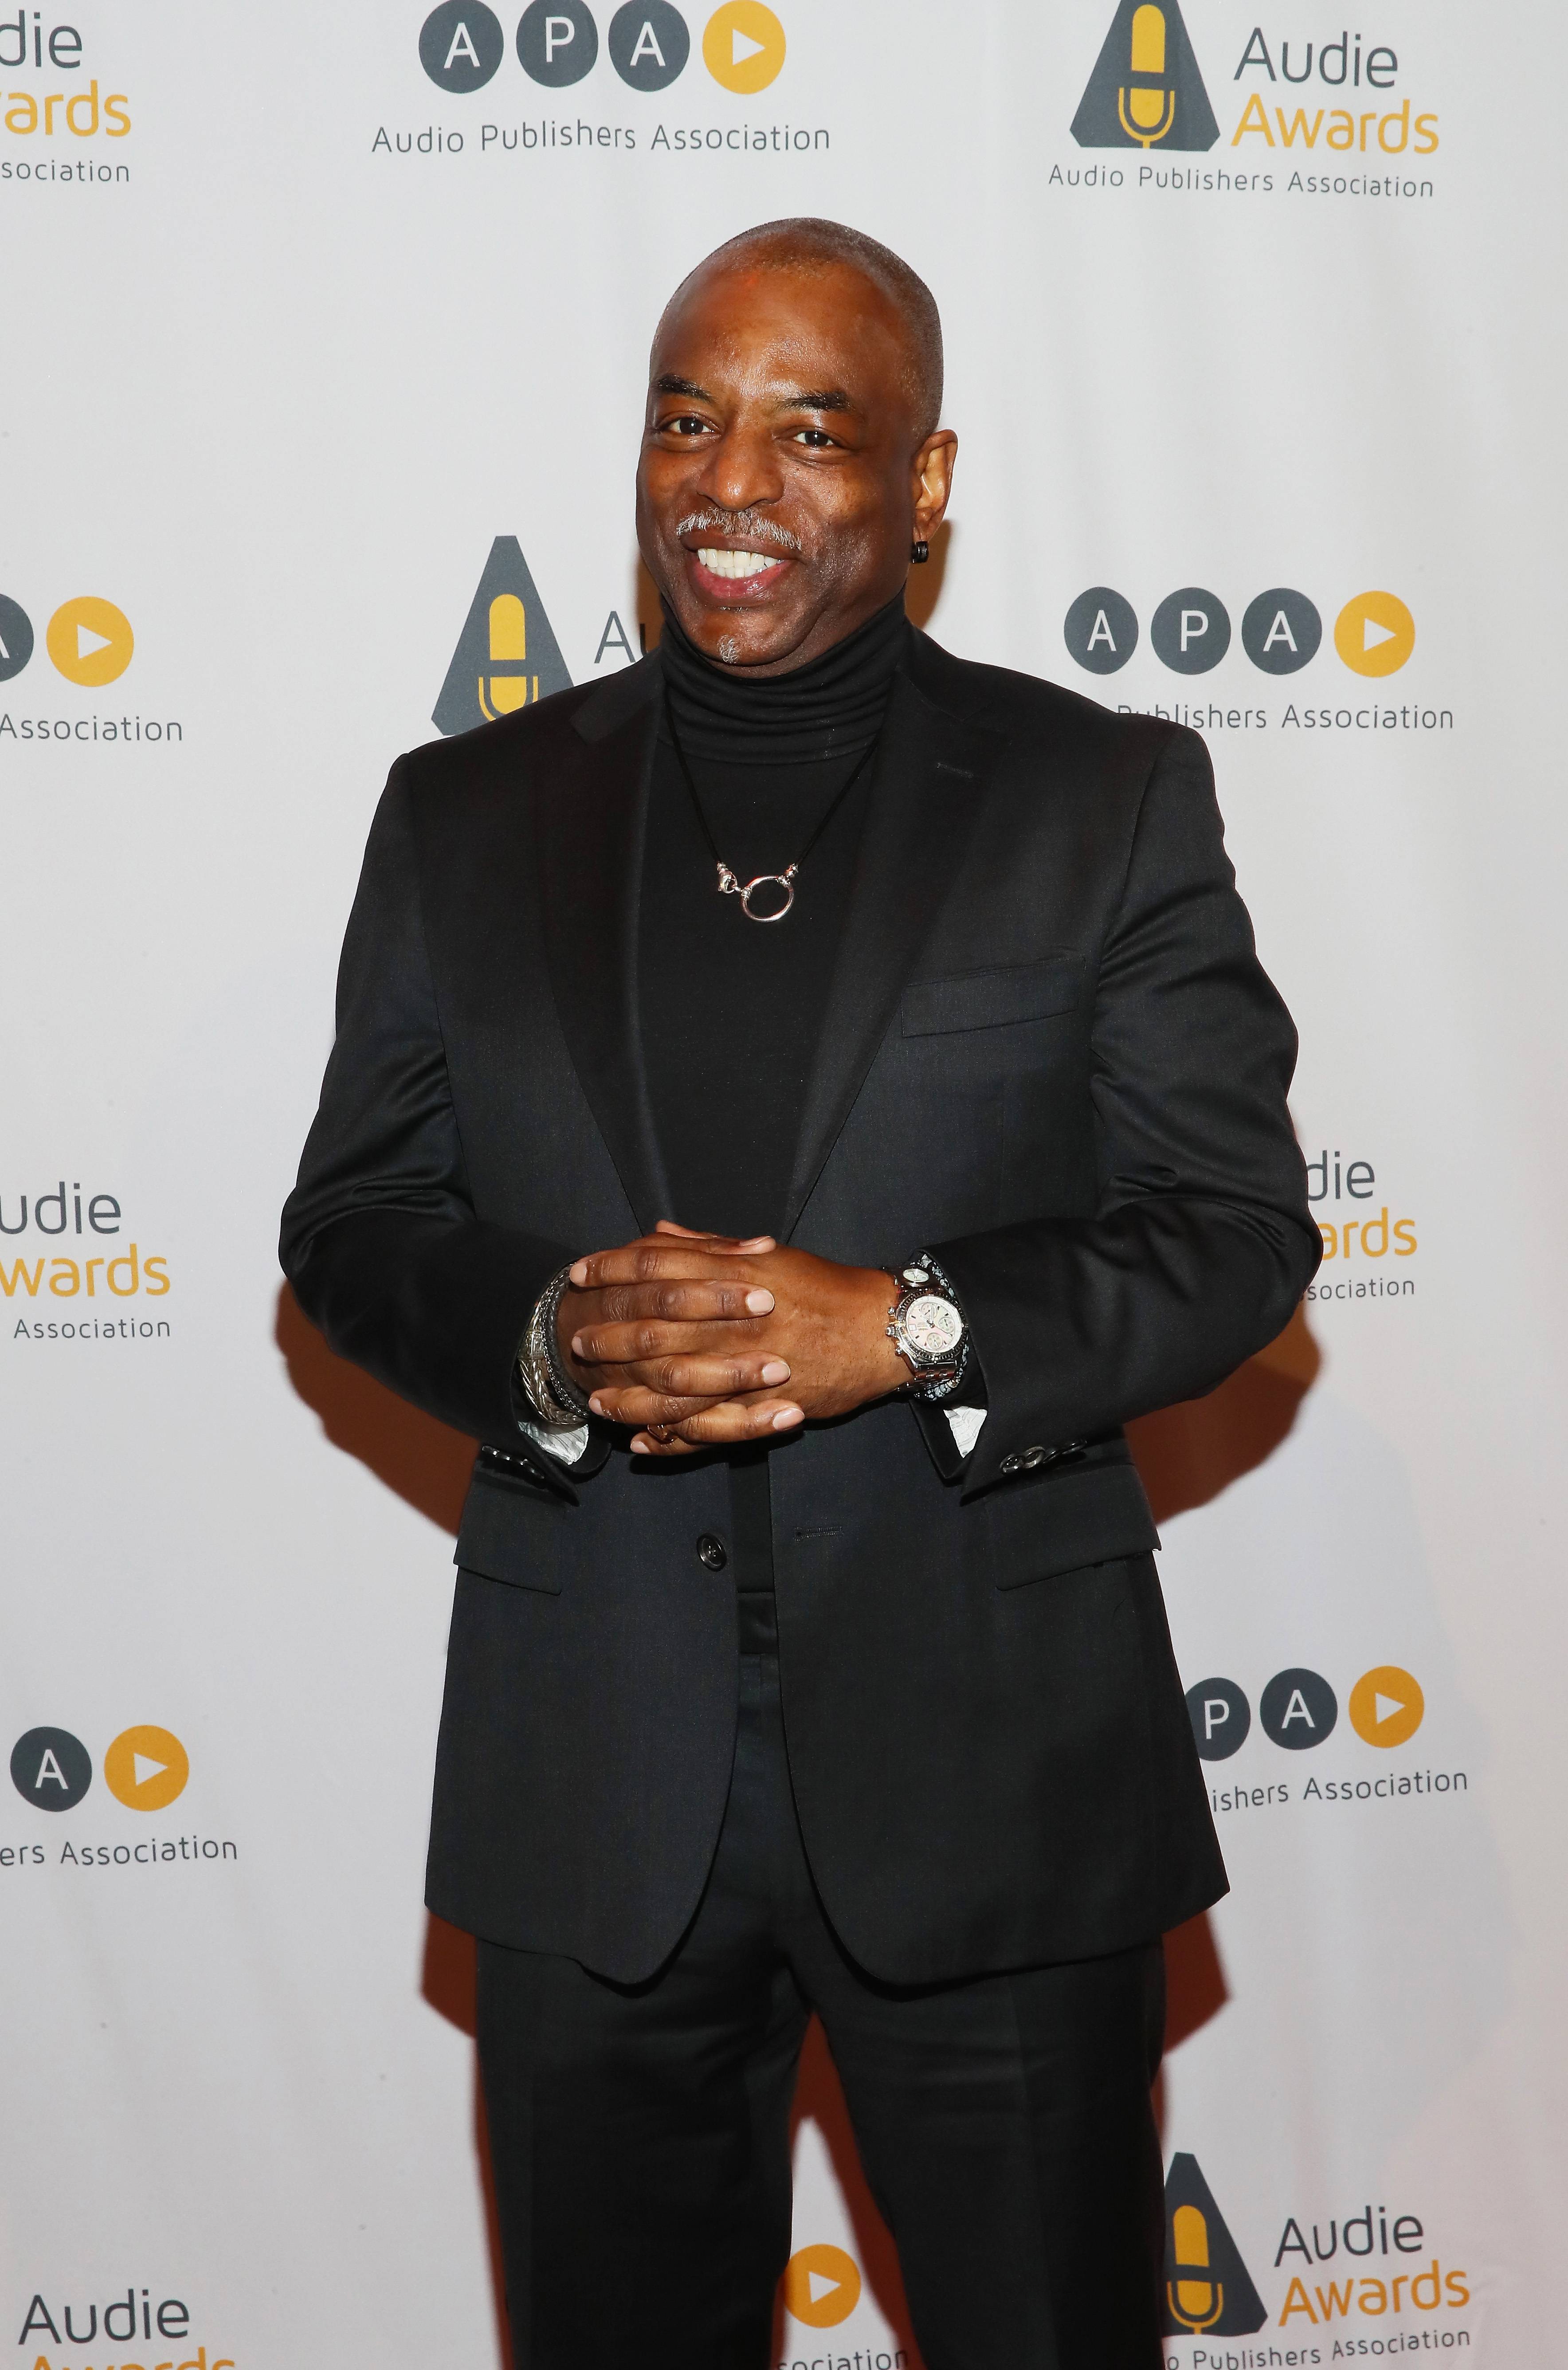 NEW YORK, NY - MARCH 04:  Lavar Burton attends Tan France hosts the 2019 Audie Awards at Gustavino's on March 4, 2019 in New York City.  (Photo by Astrid Stawiarz/Getty Images for the Audio Publisher Association)